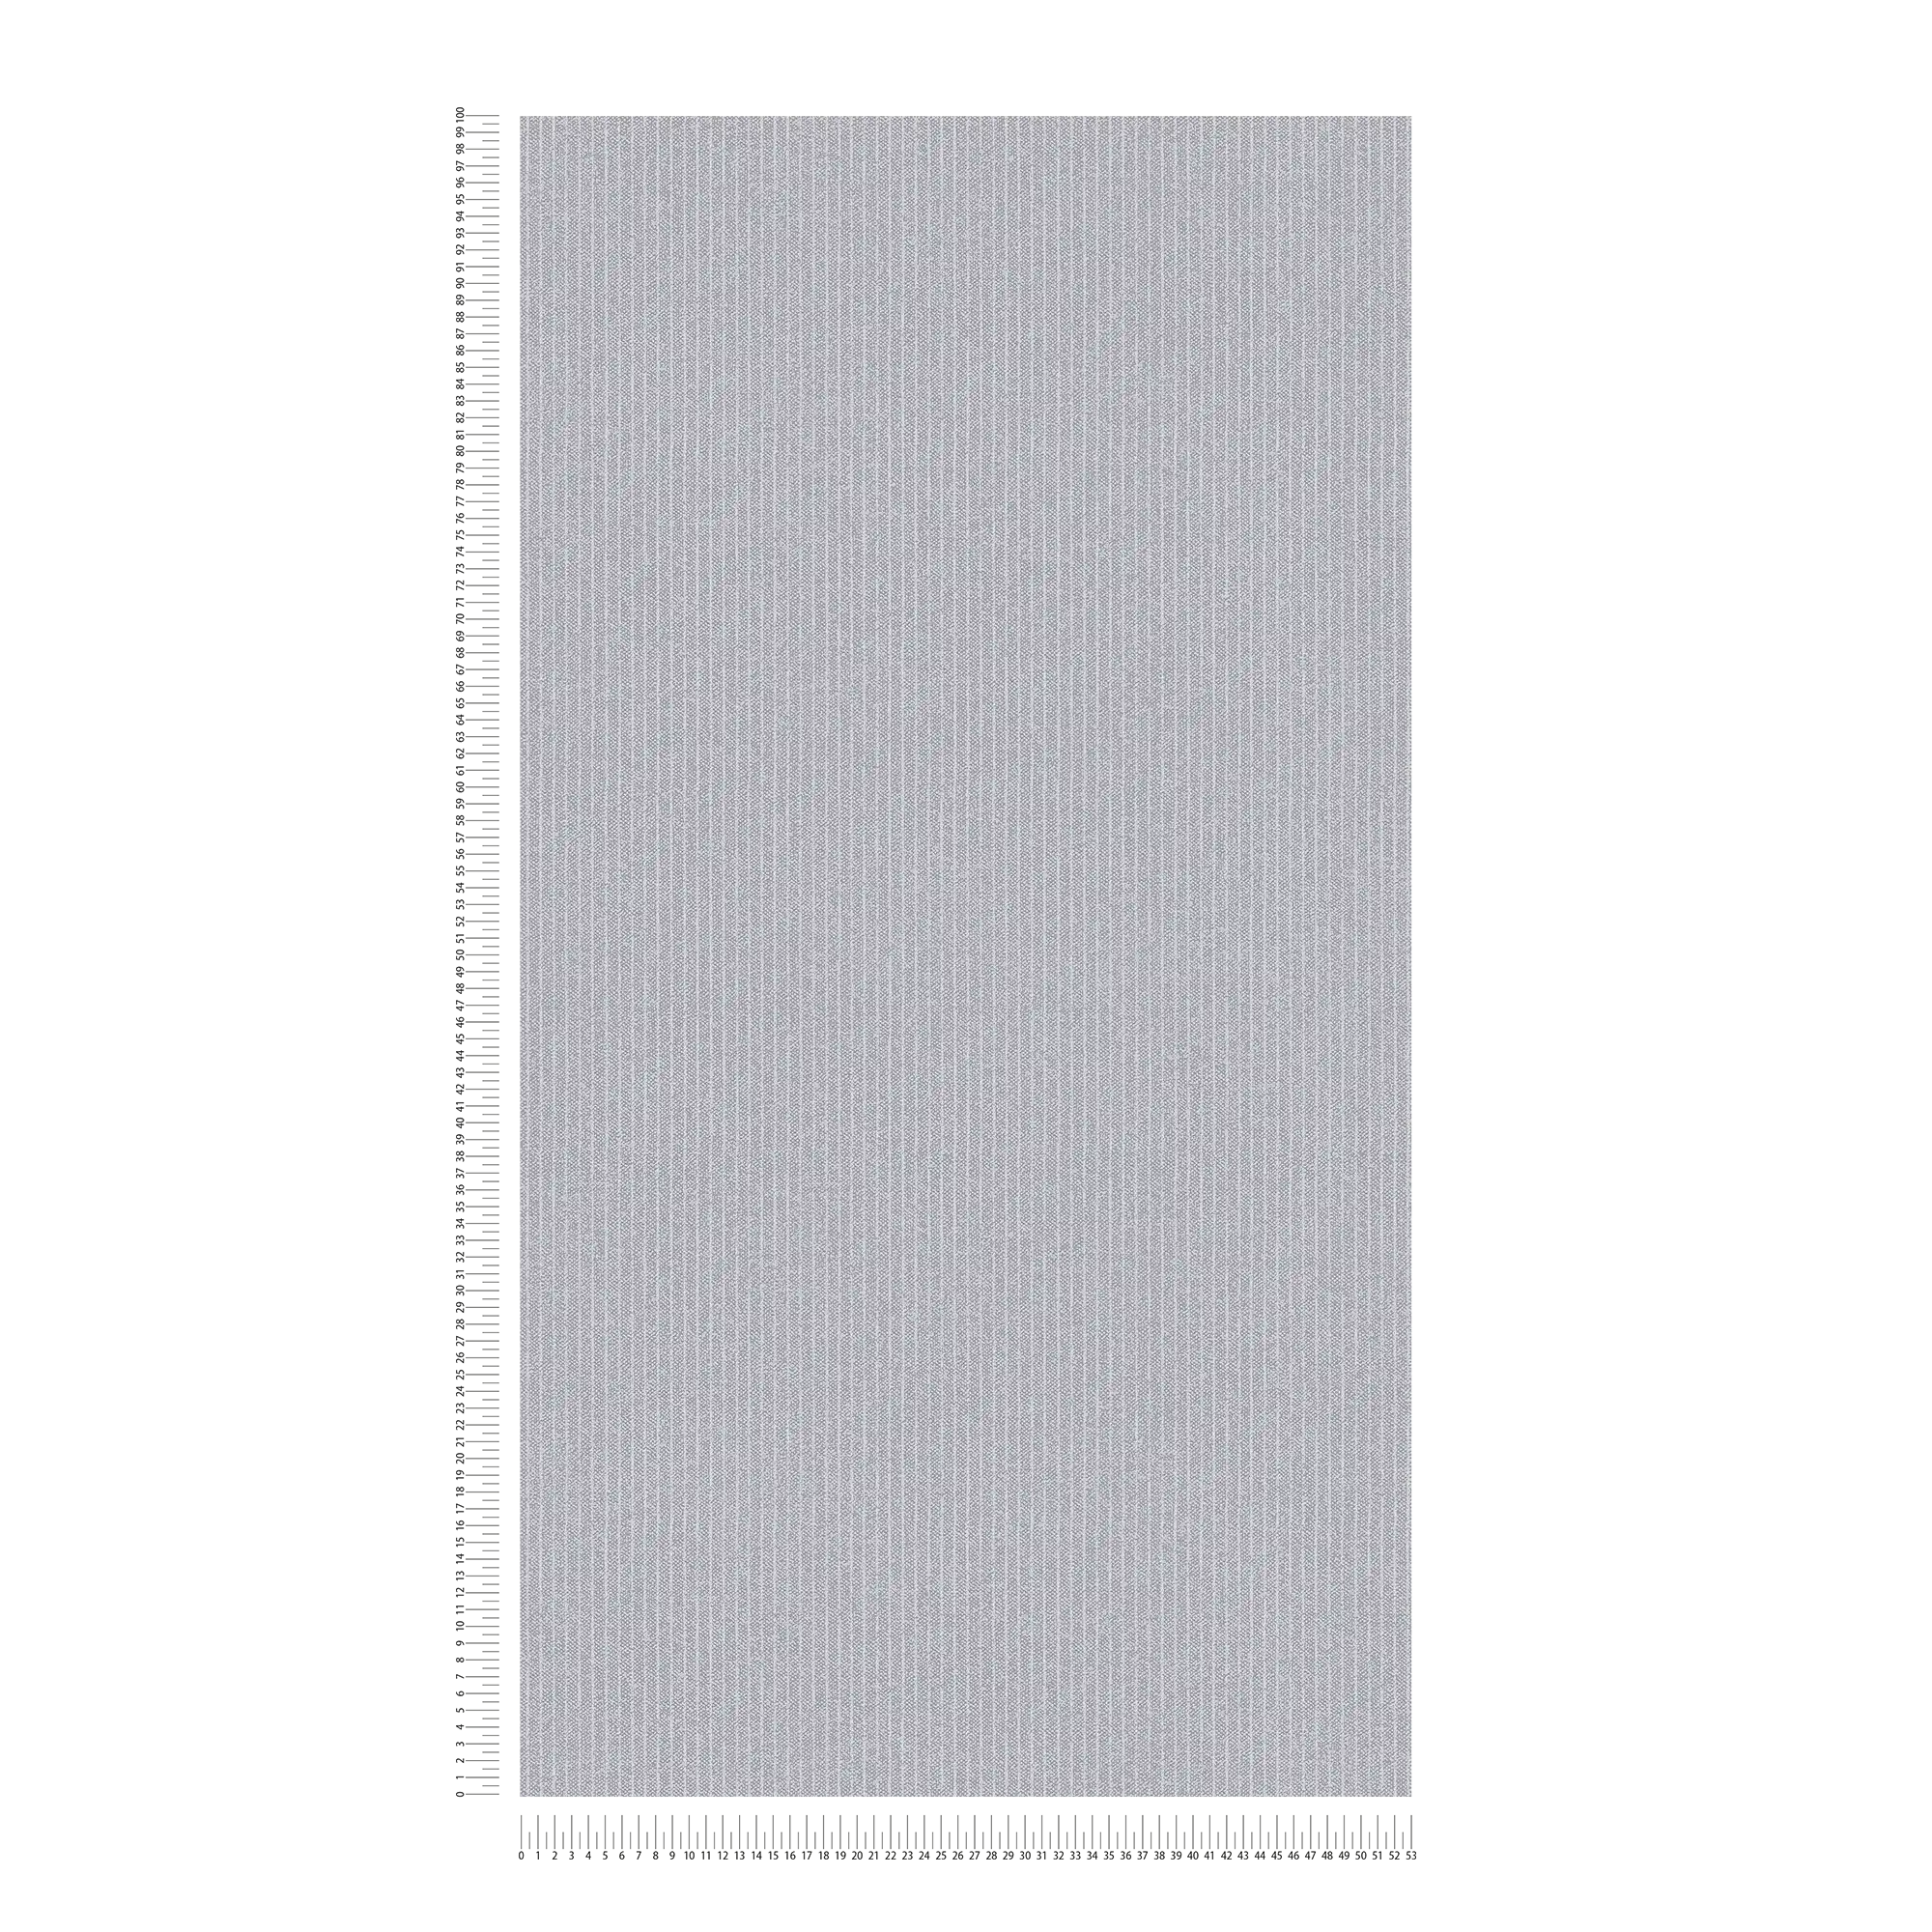             Lined wallpaper narrow stripes in textile look - grey
        